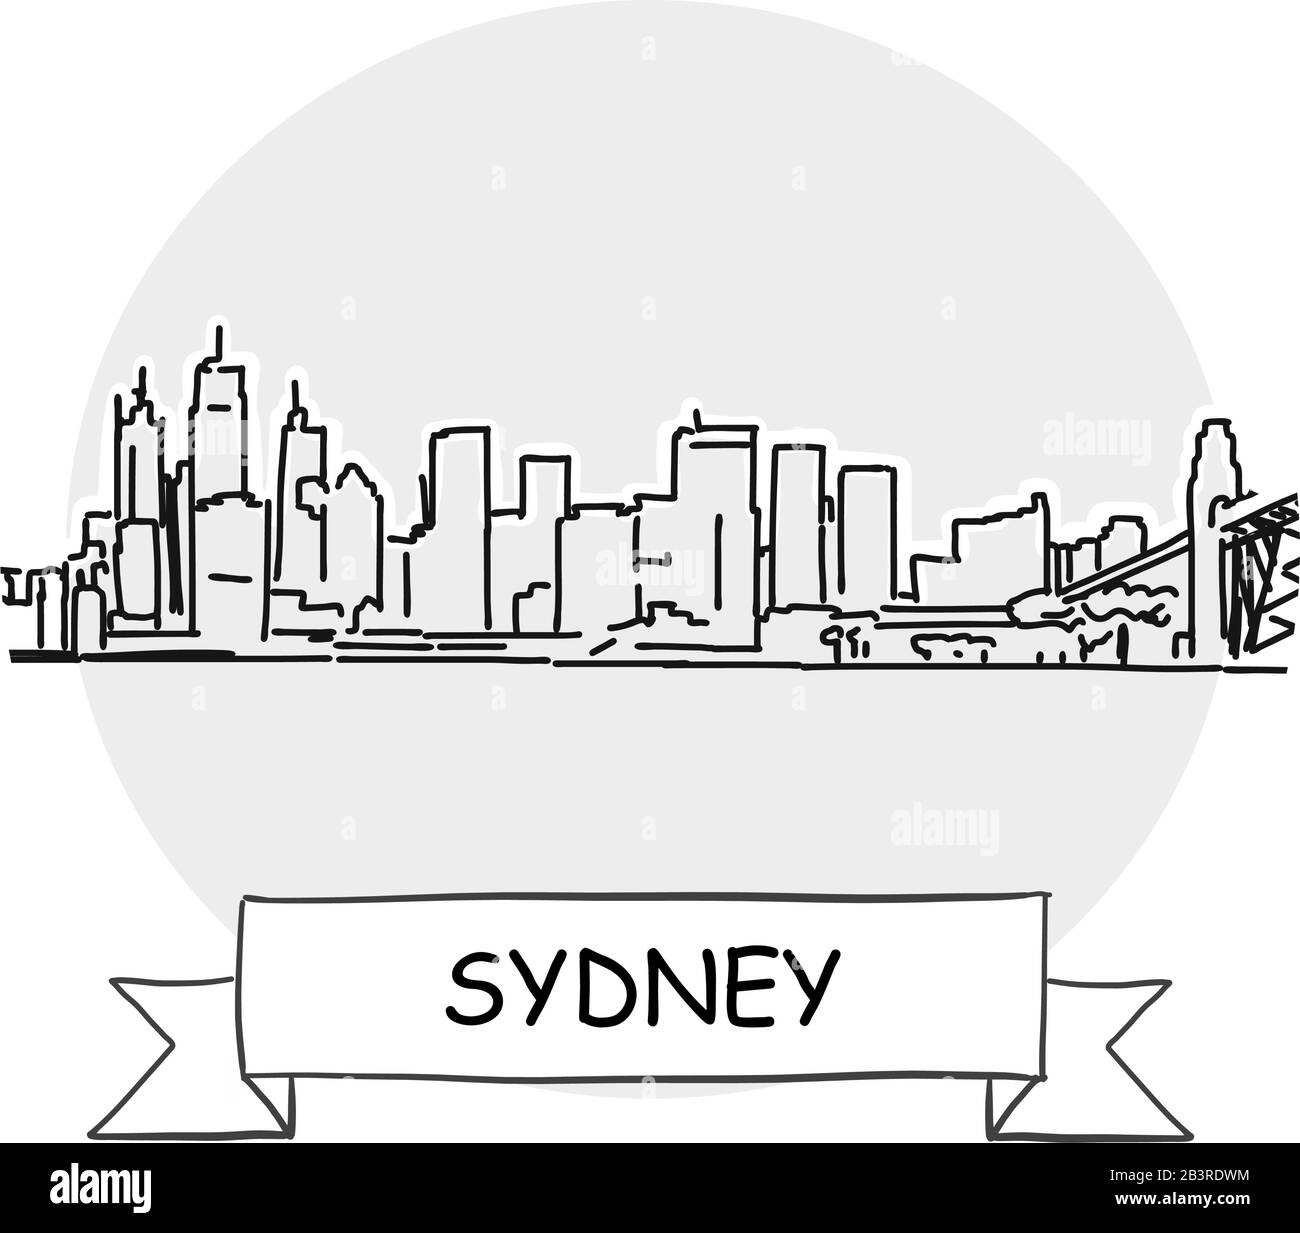 Sydney Hand-Drawn Urban Vector Sign. Black Line Art Illustration with Ribbon and Title. Stock Vector